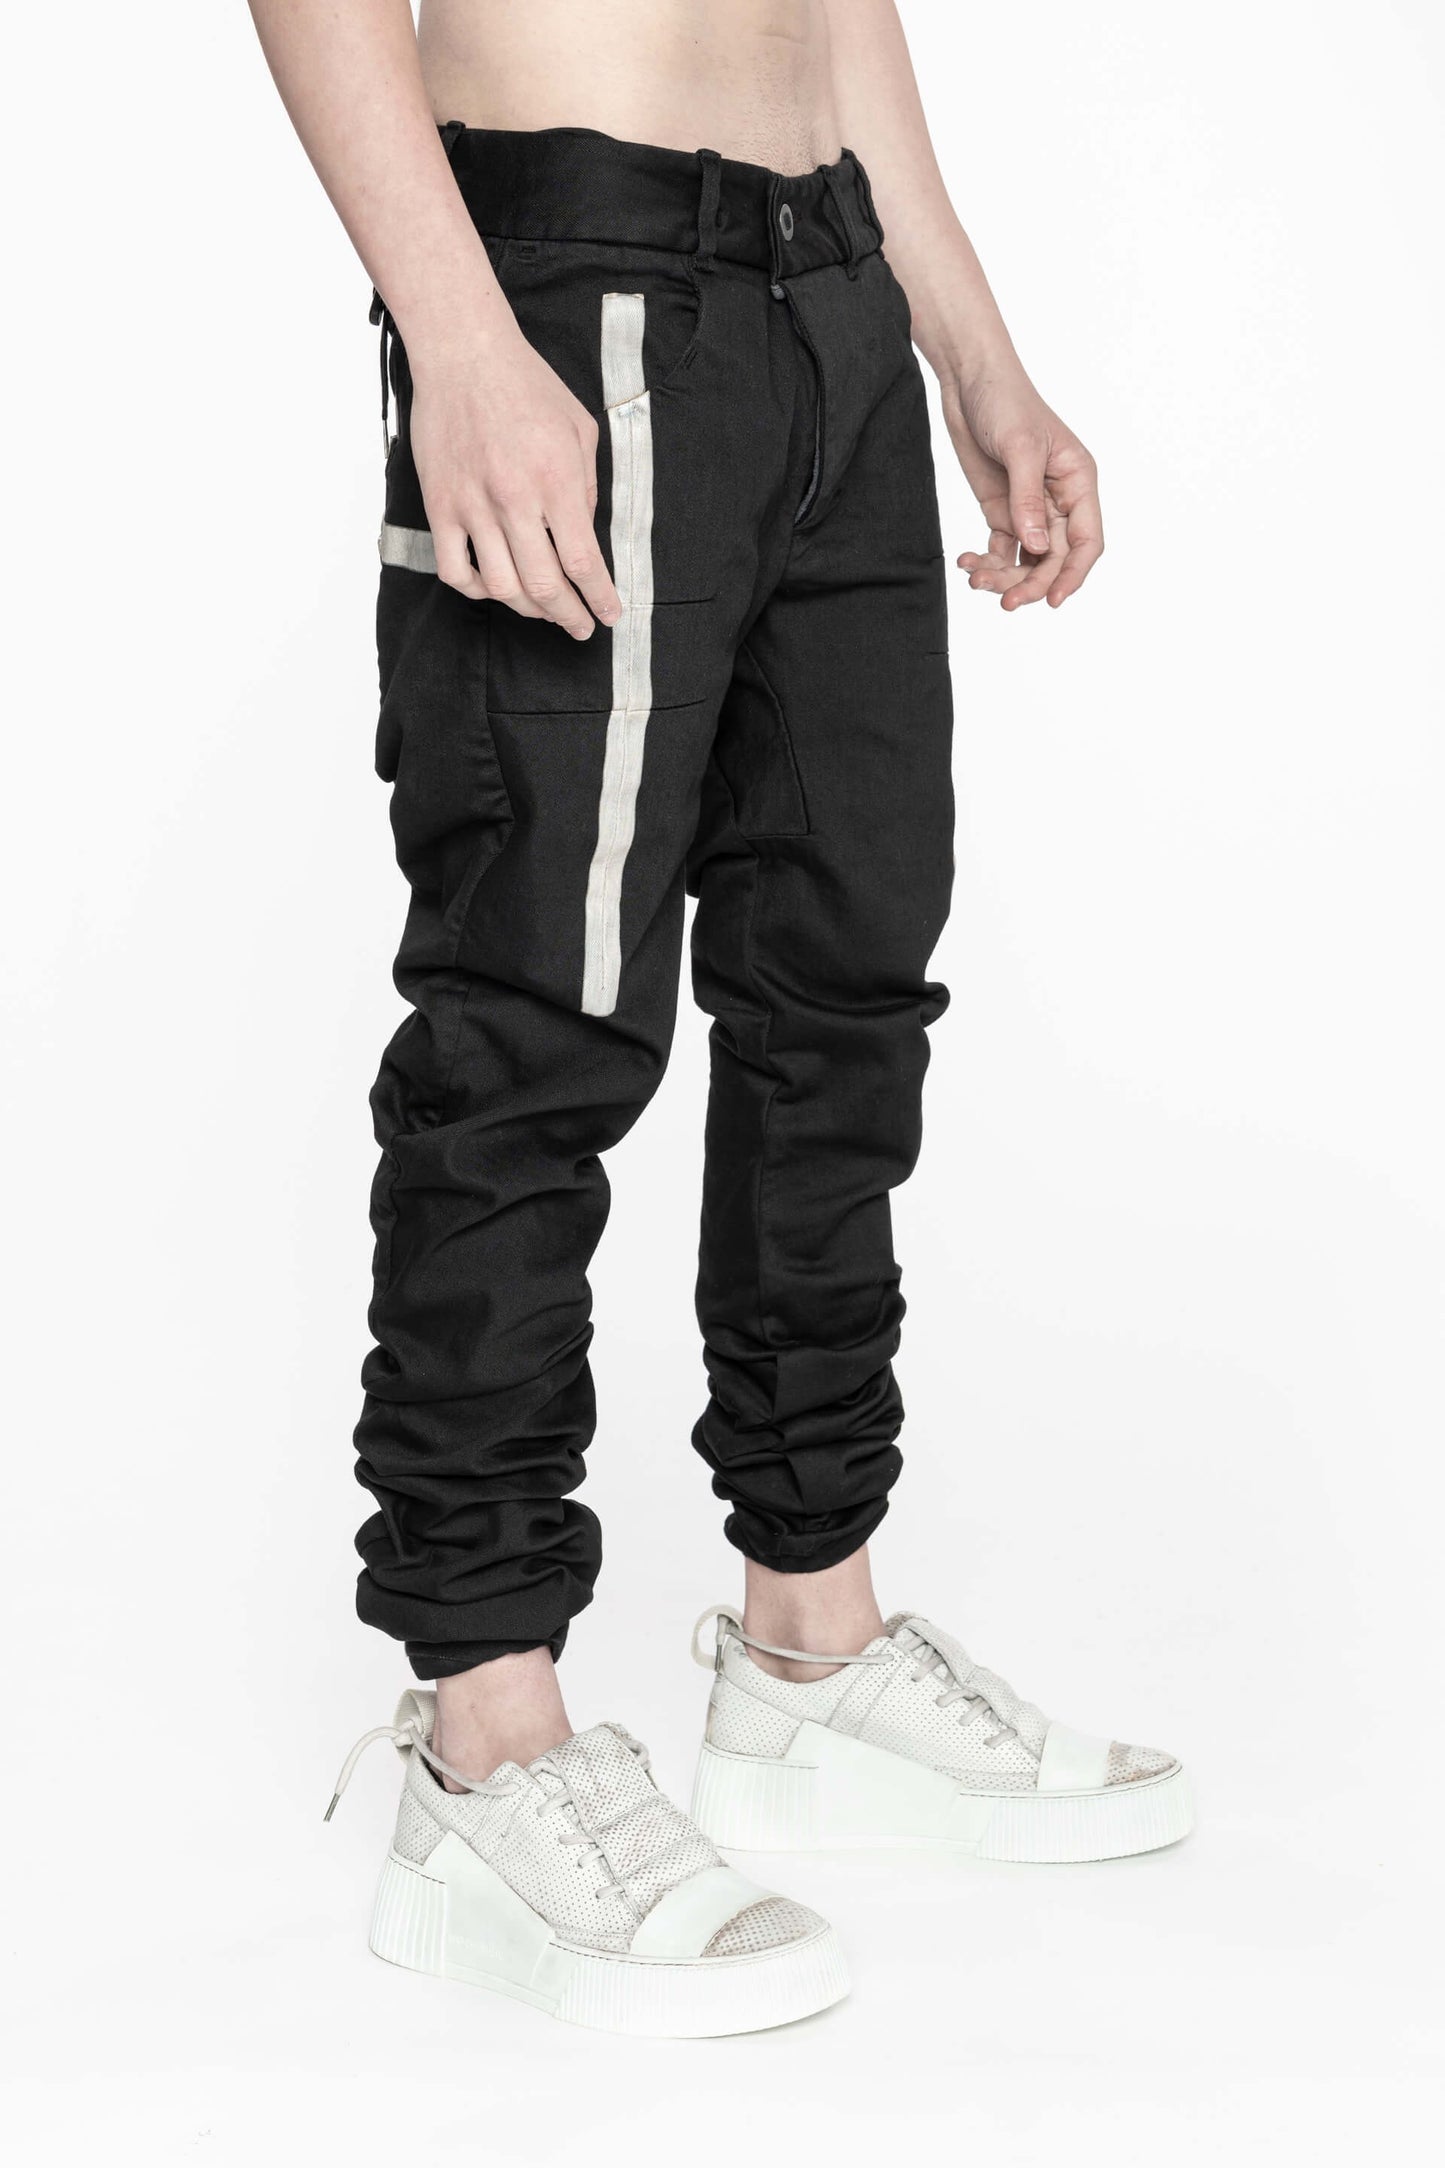 Black with White Taped Seams Object Dyed Denim Pants P13 Tight Fit